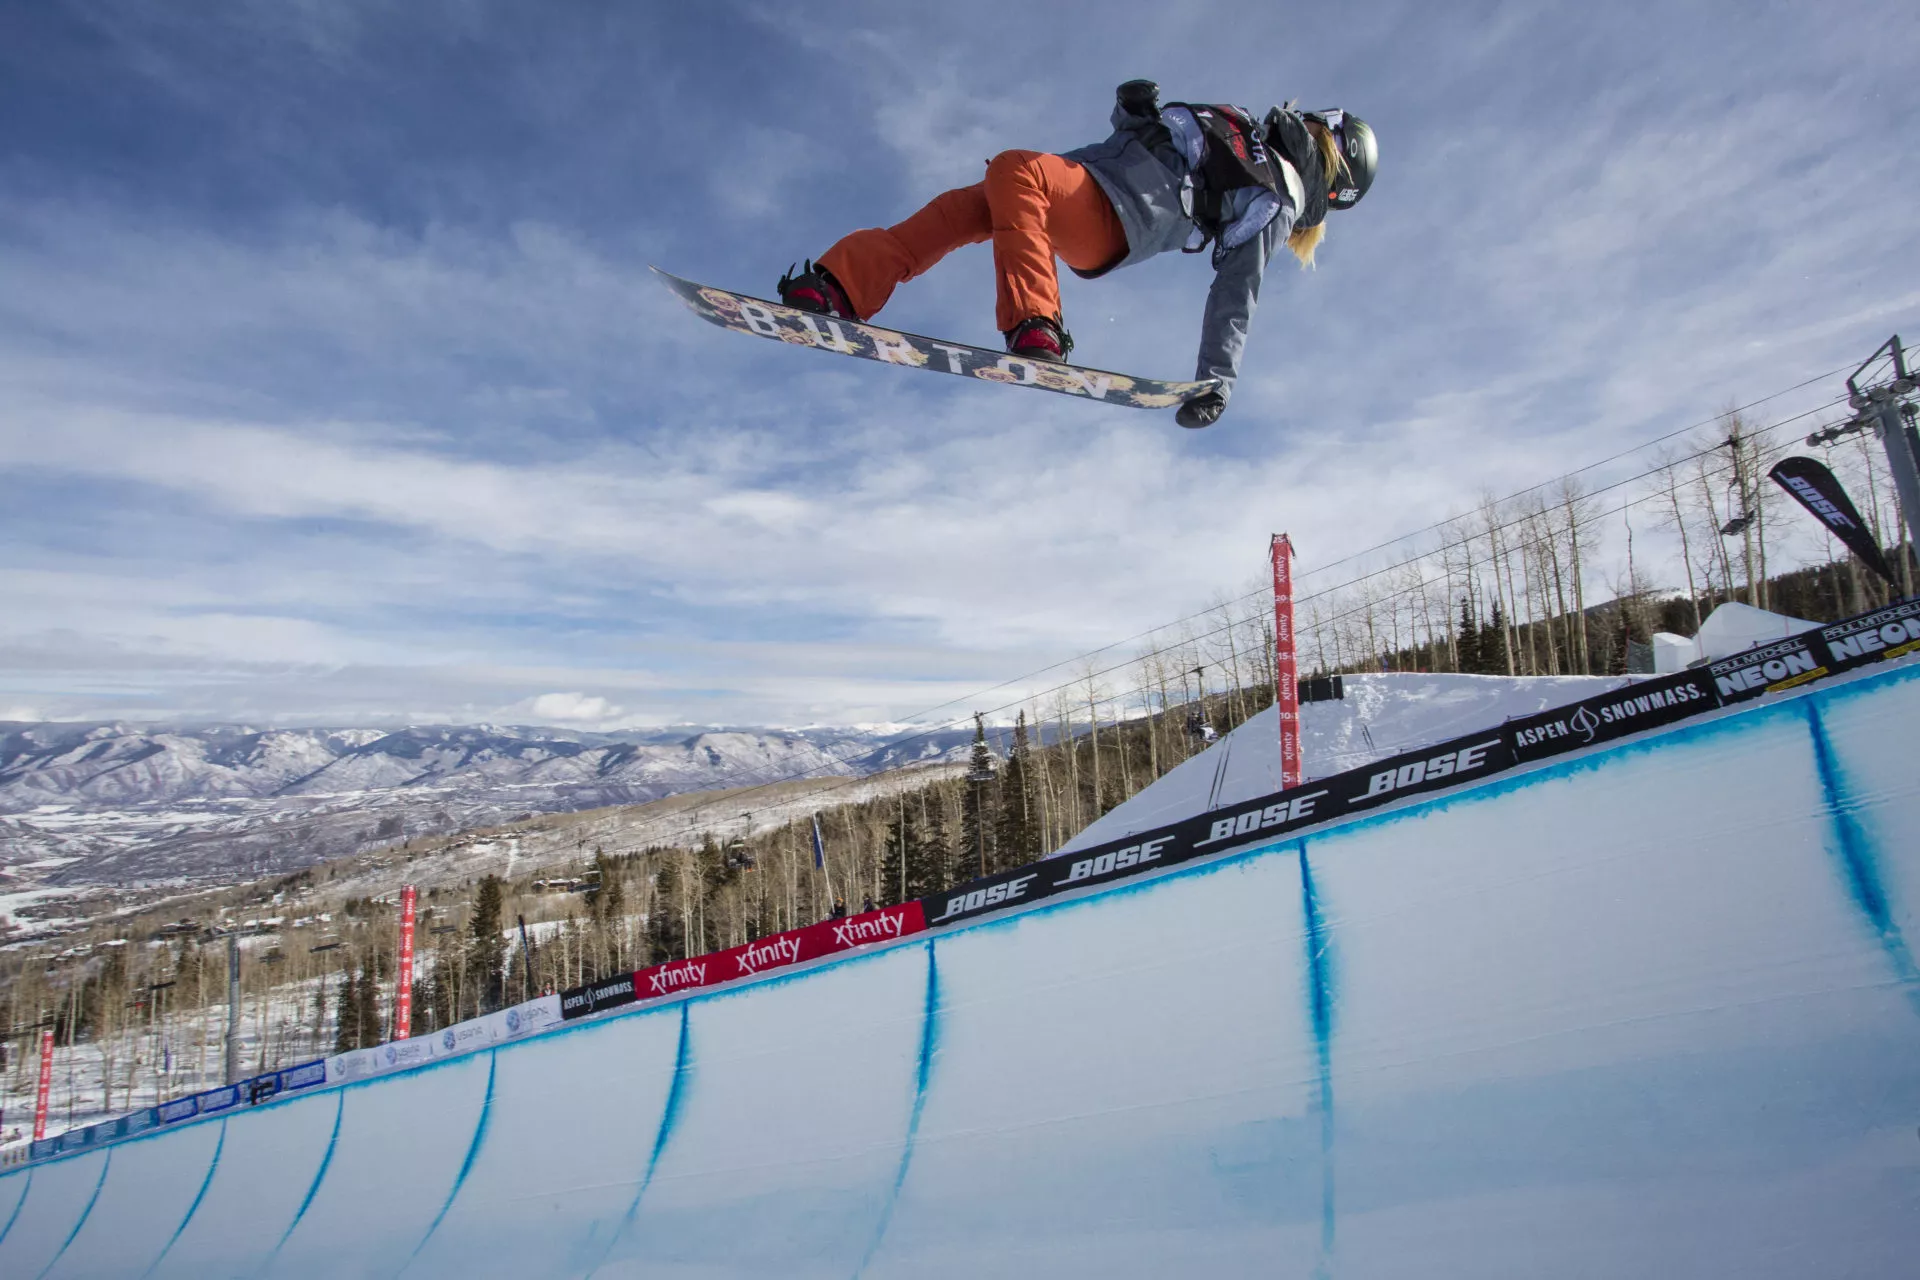 Snowmass Buttermilk in USA, North America | Snowboarding,Skiing - Rated 3.9